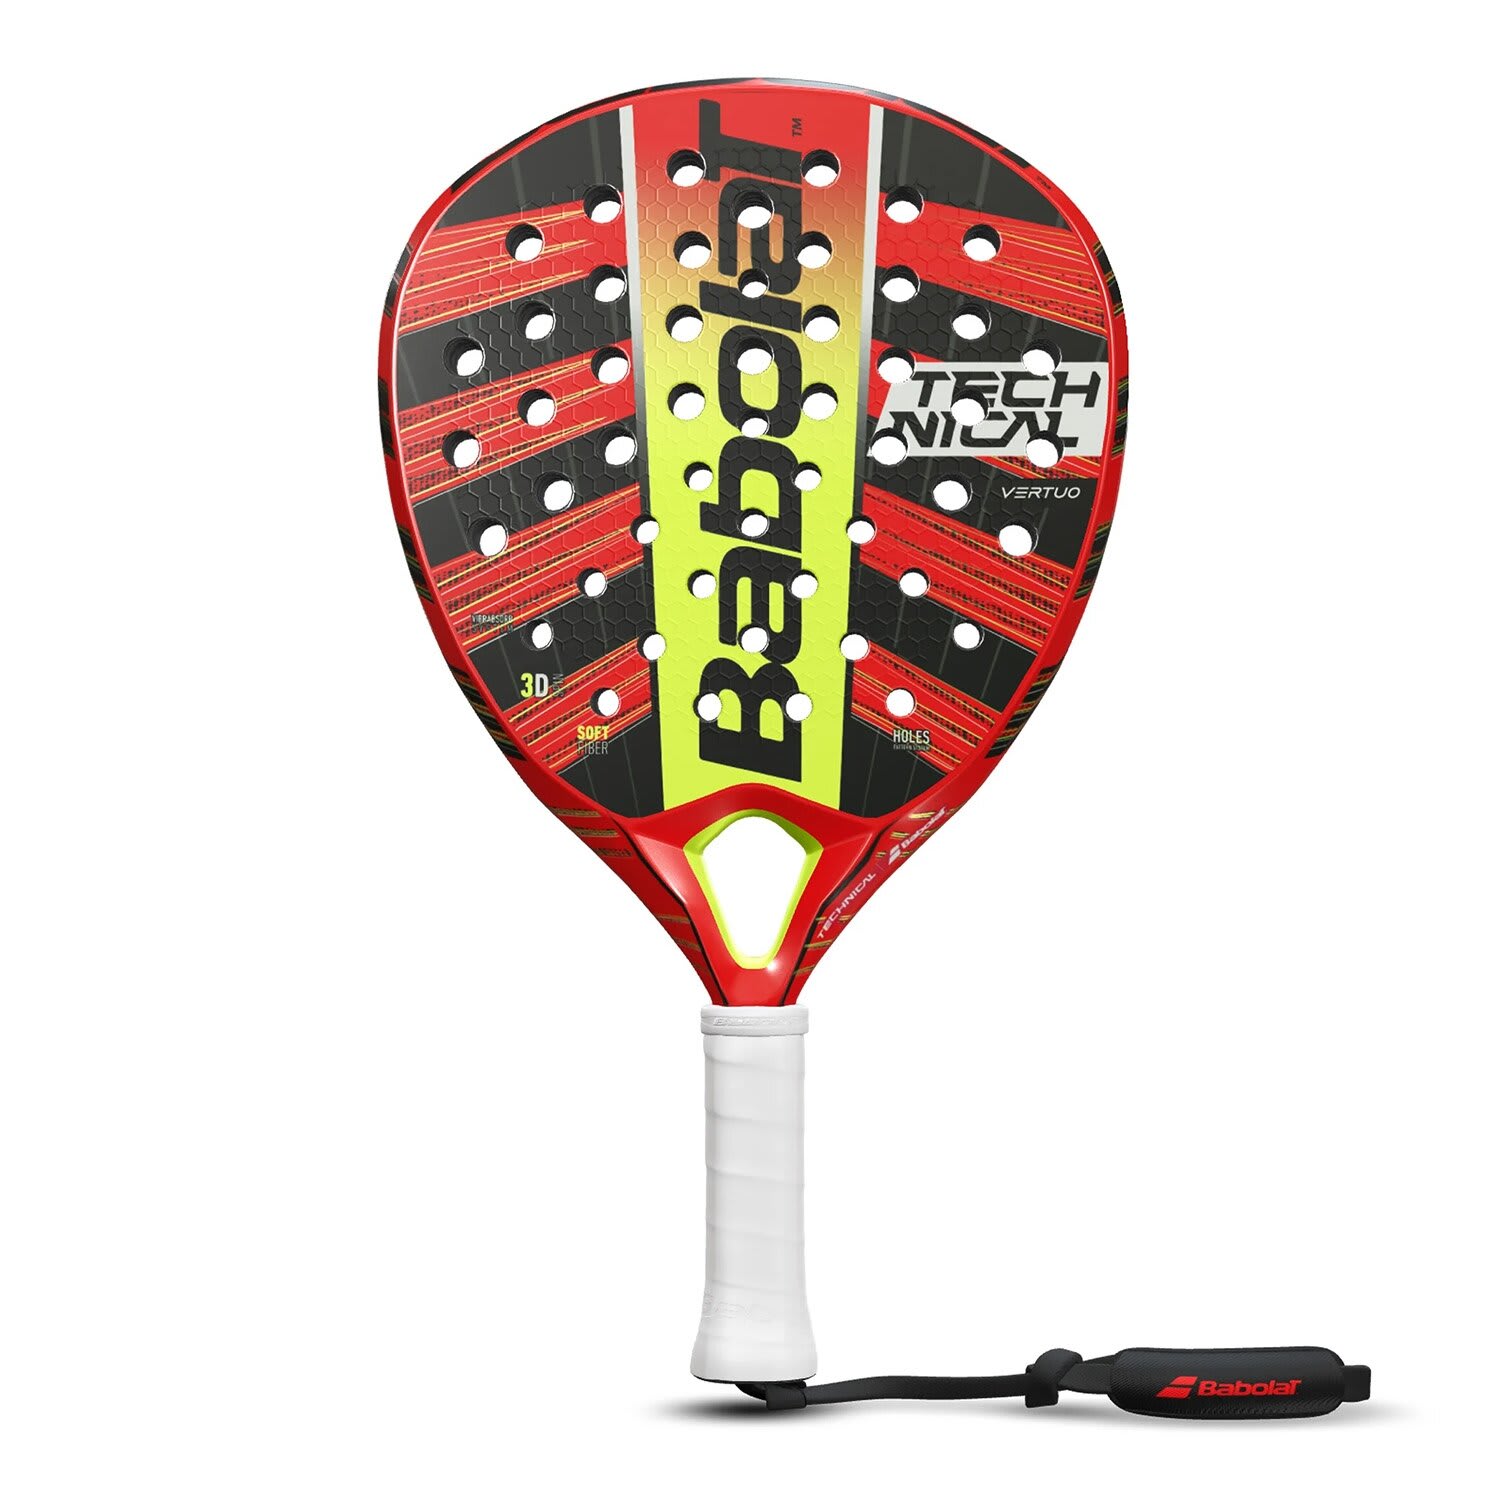 Babolat Technical Vertuo Padel Racket | by Babolat | Price: R 3 499,9 ...